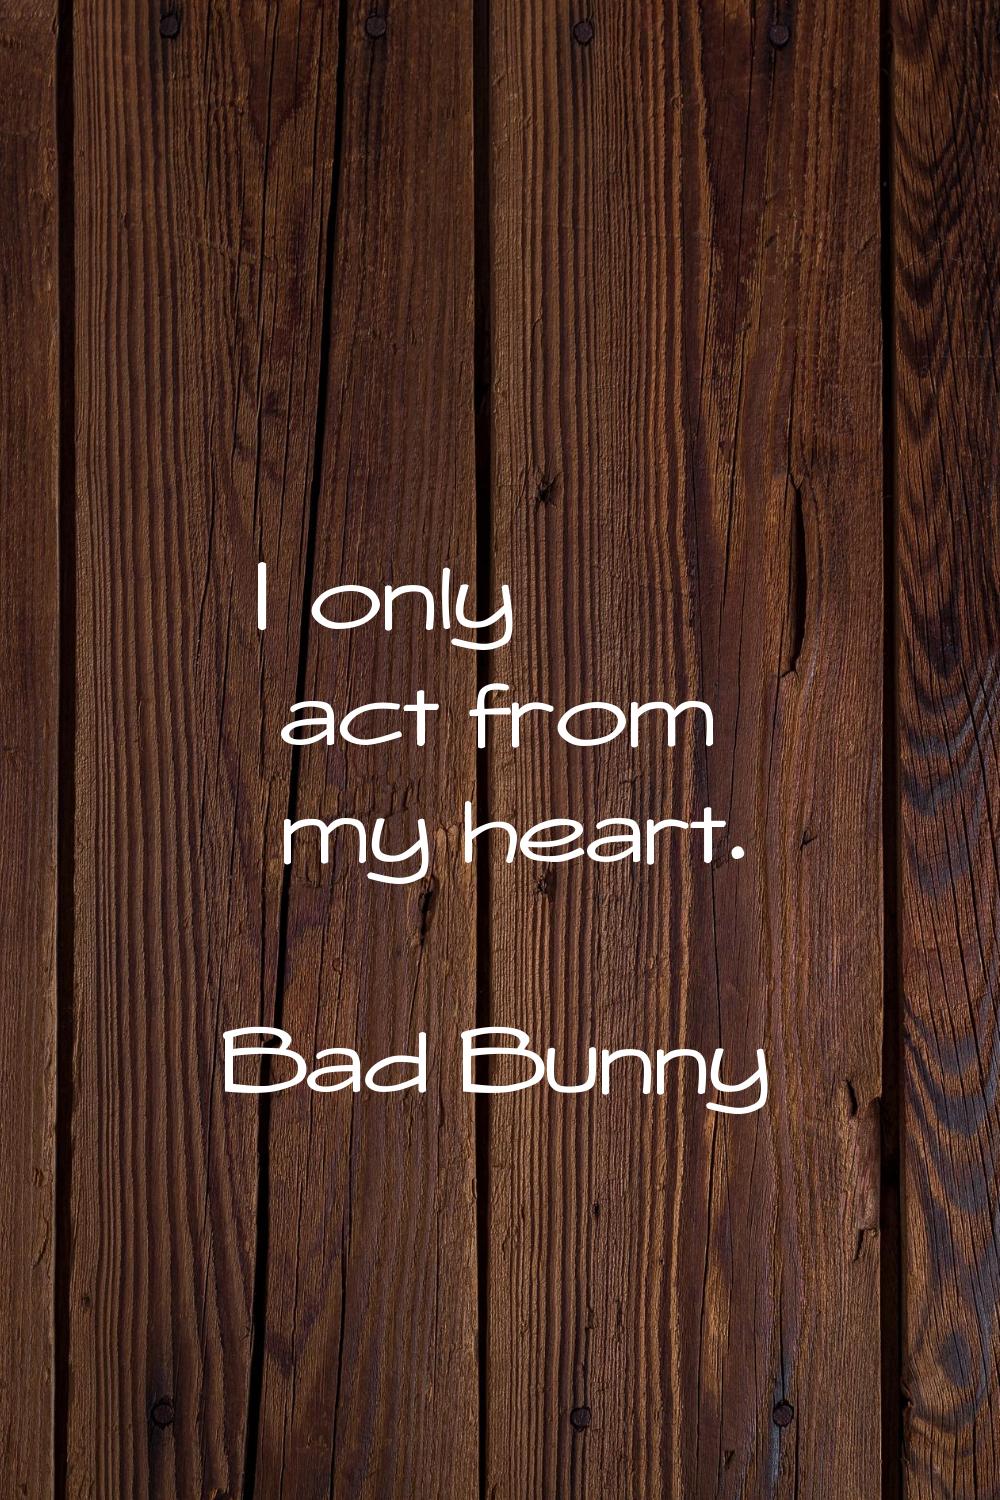 I only act from my heart.